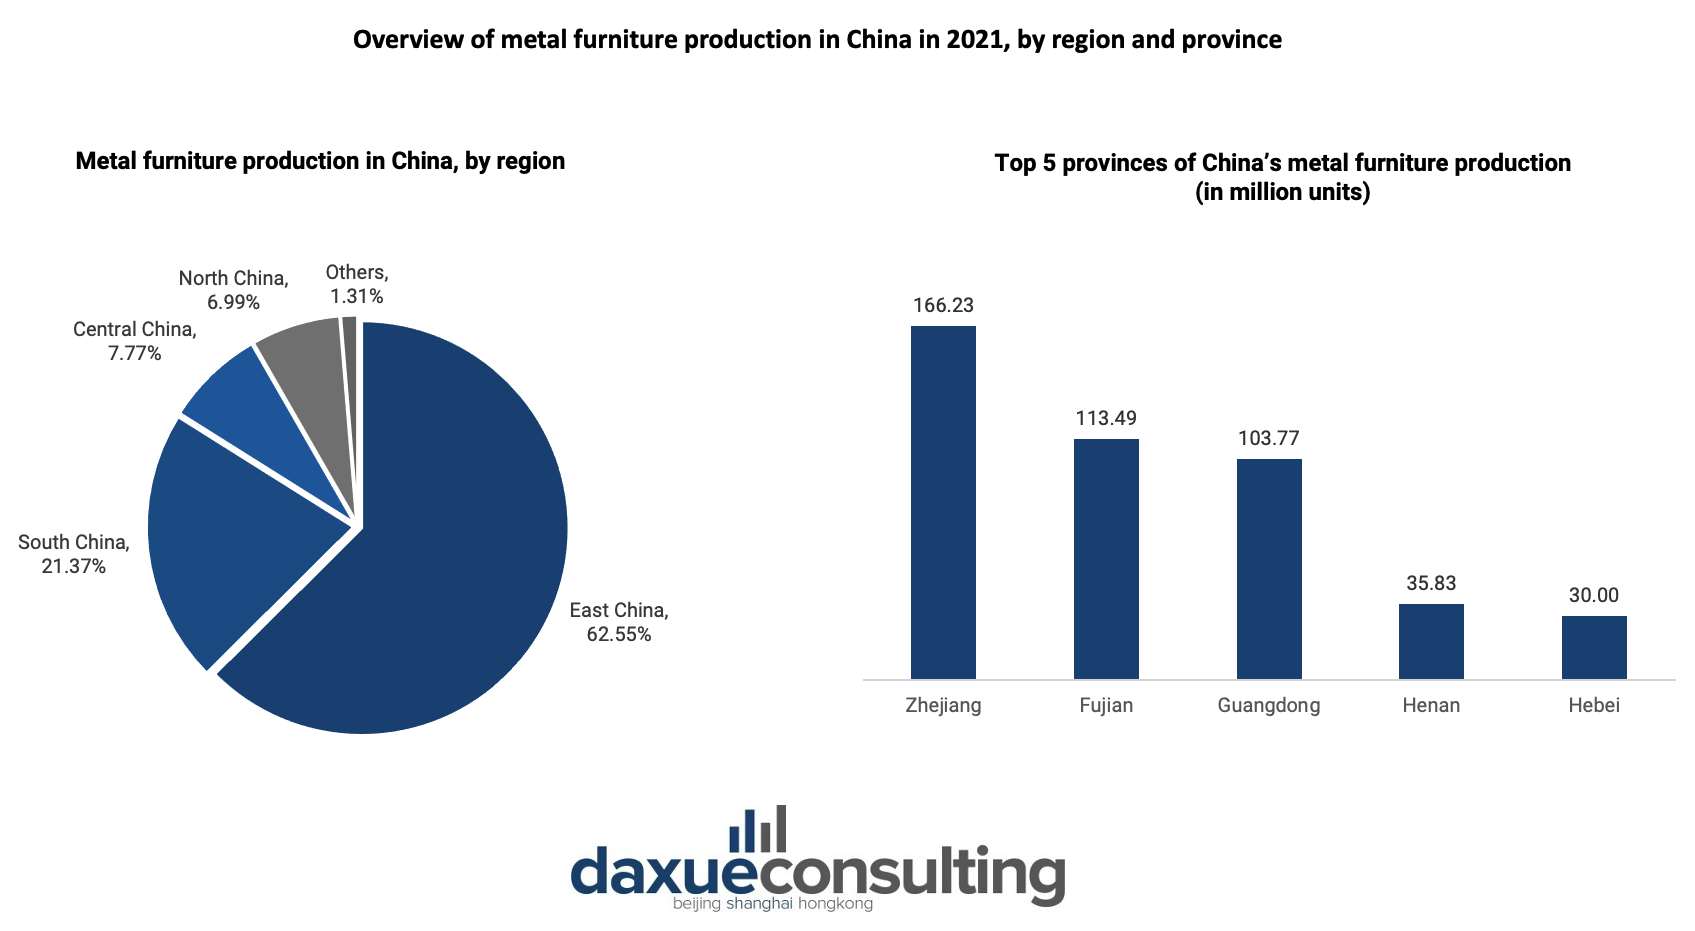 Overview of metal furniture production in China 